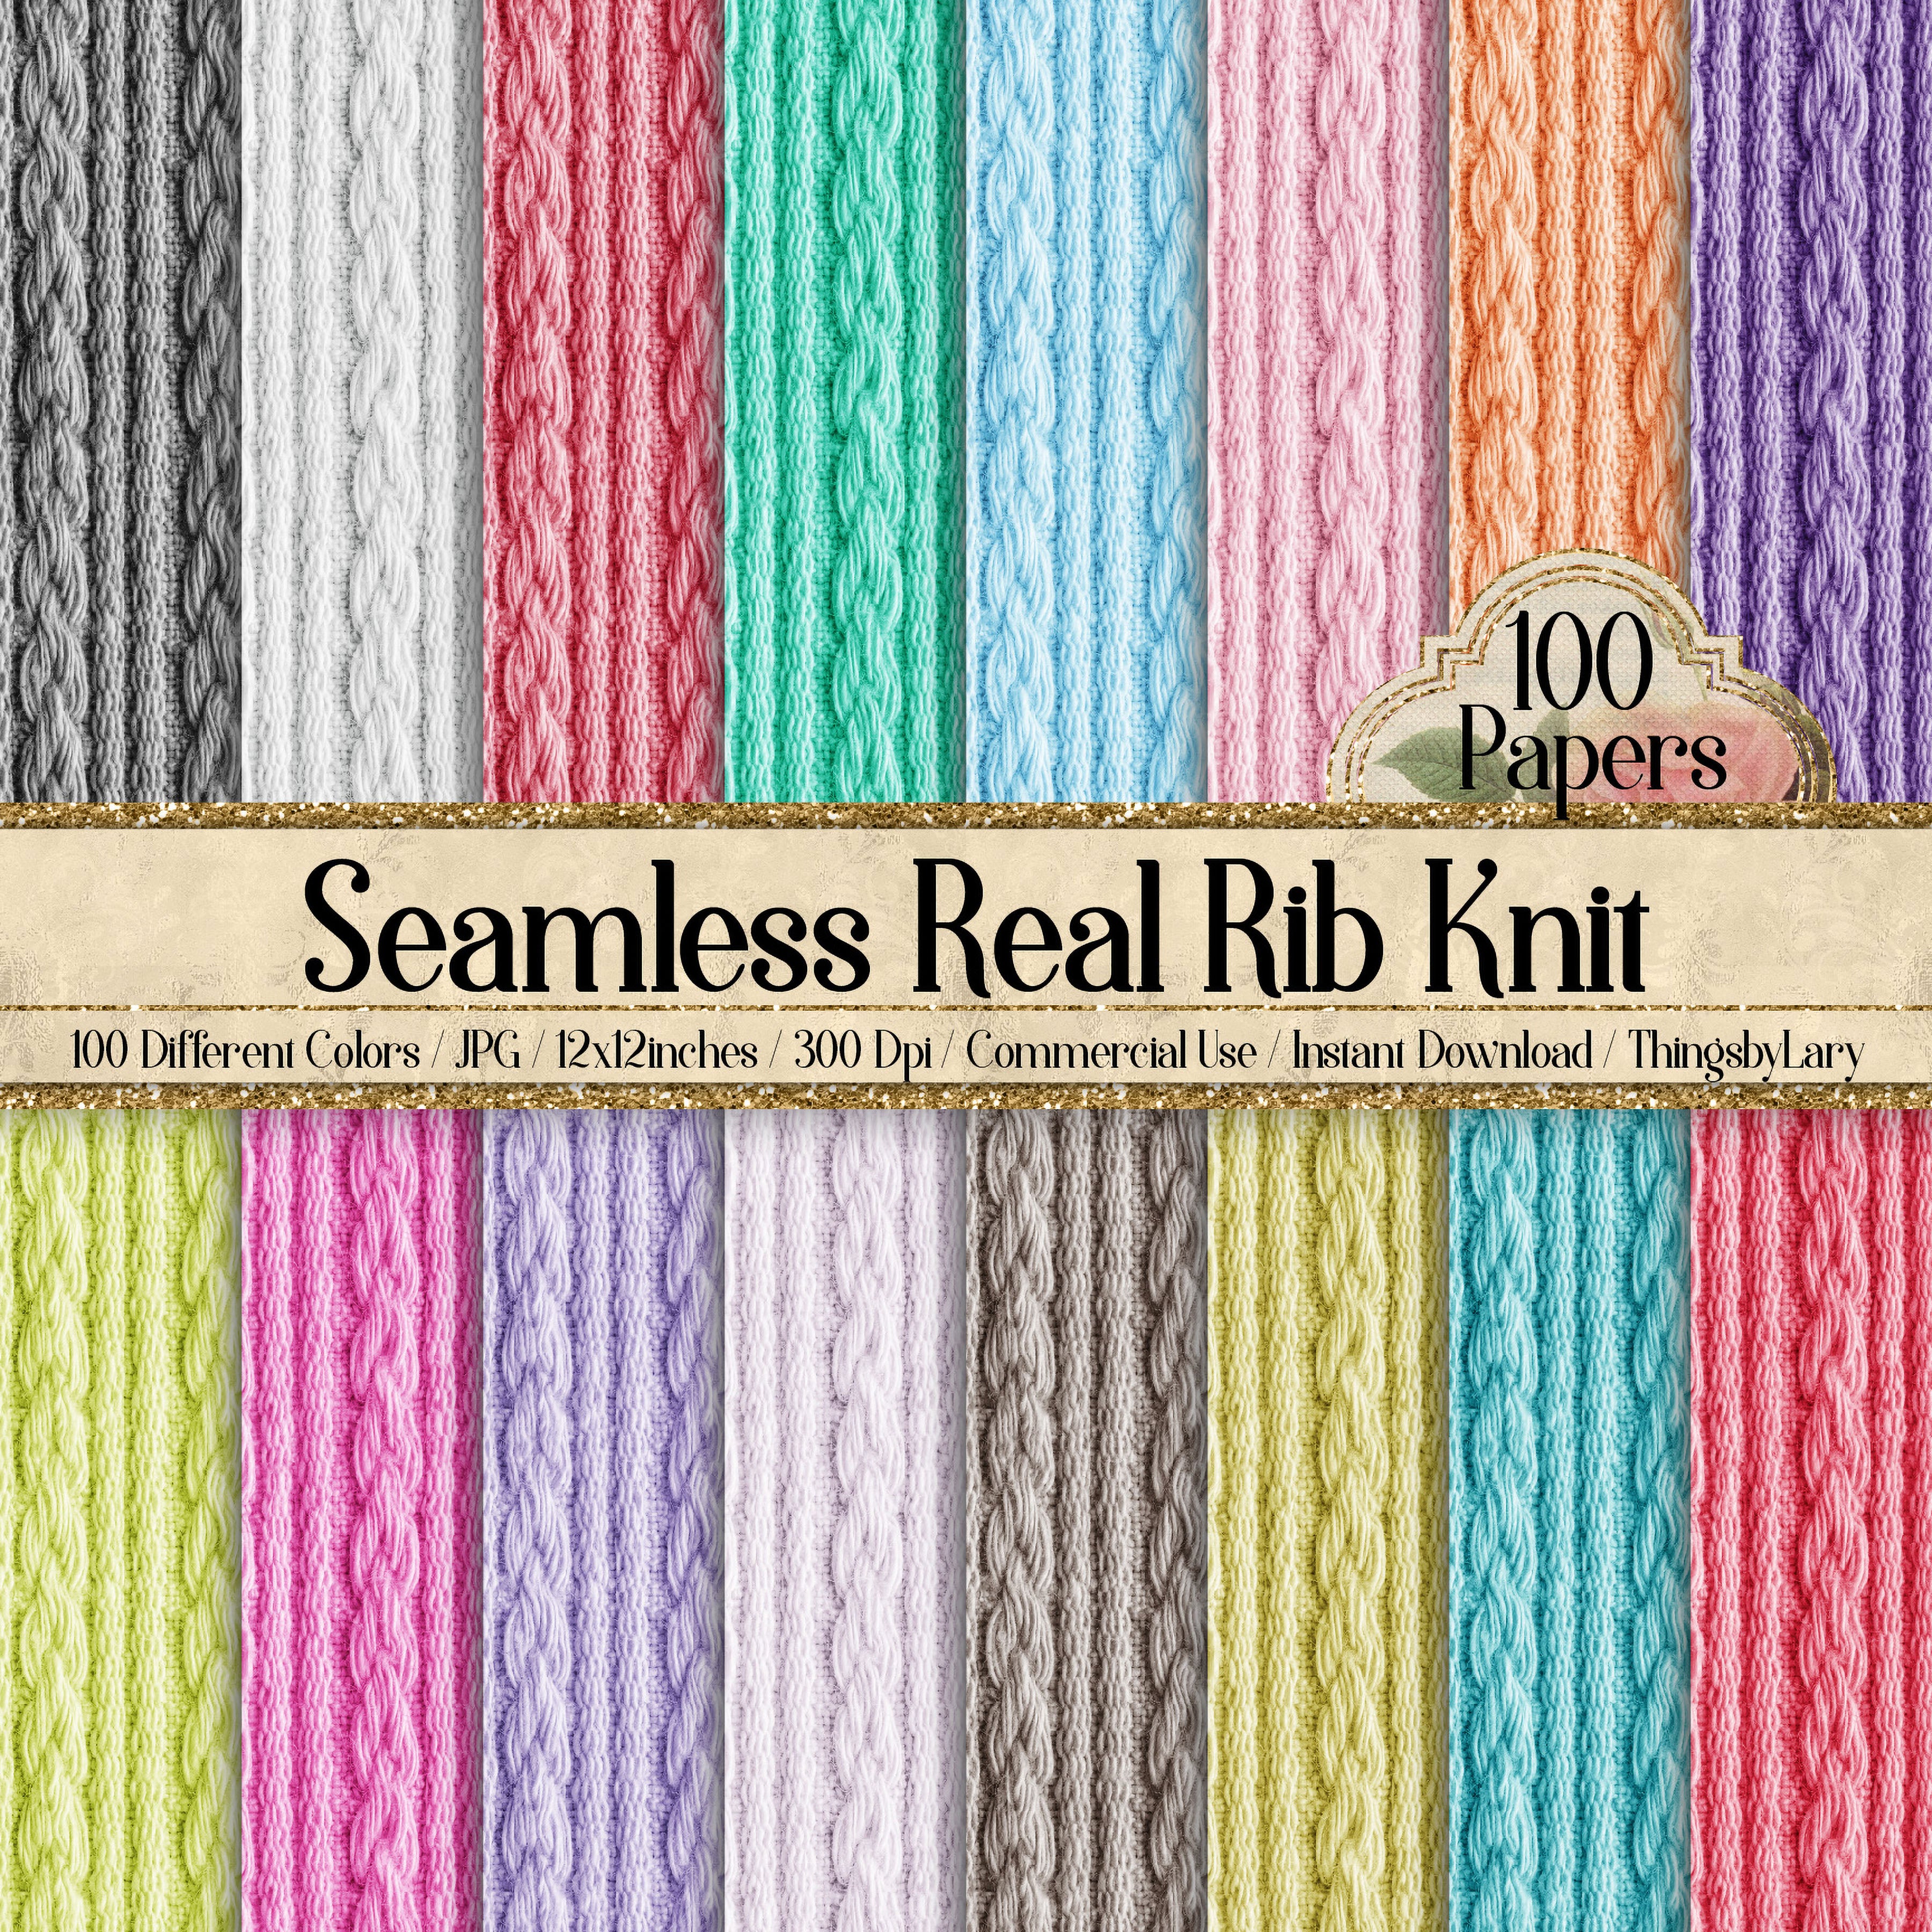 100 Seamless Real Rib Knit Sweater Digital Papers